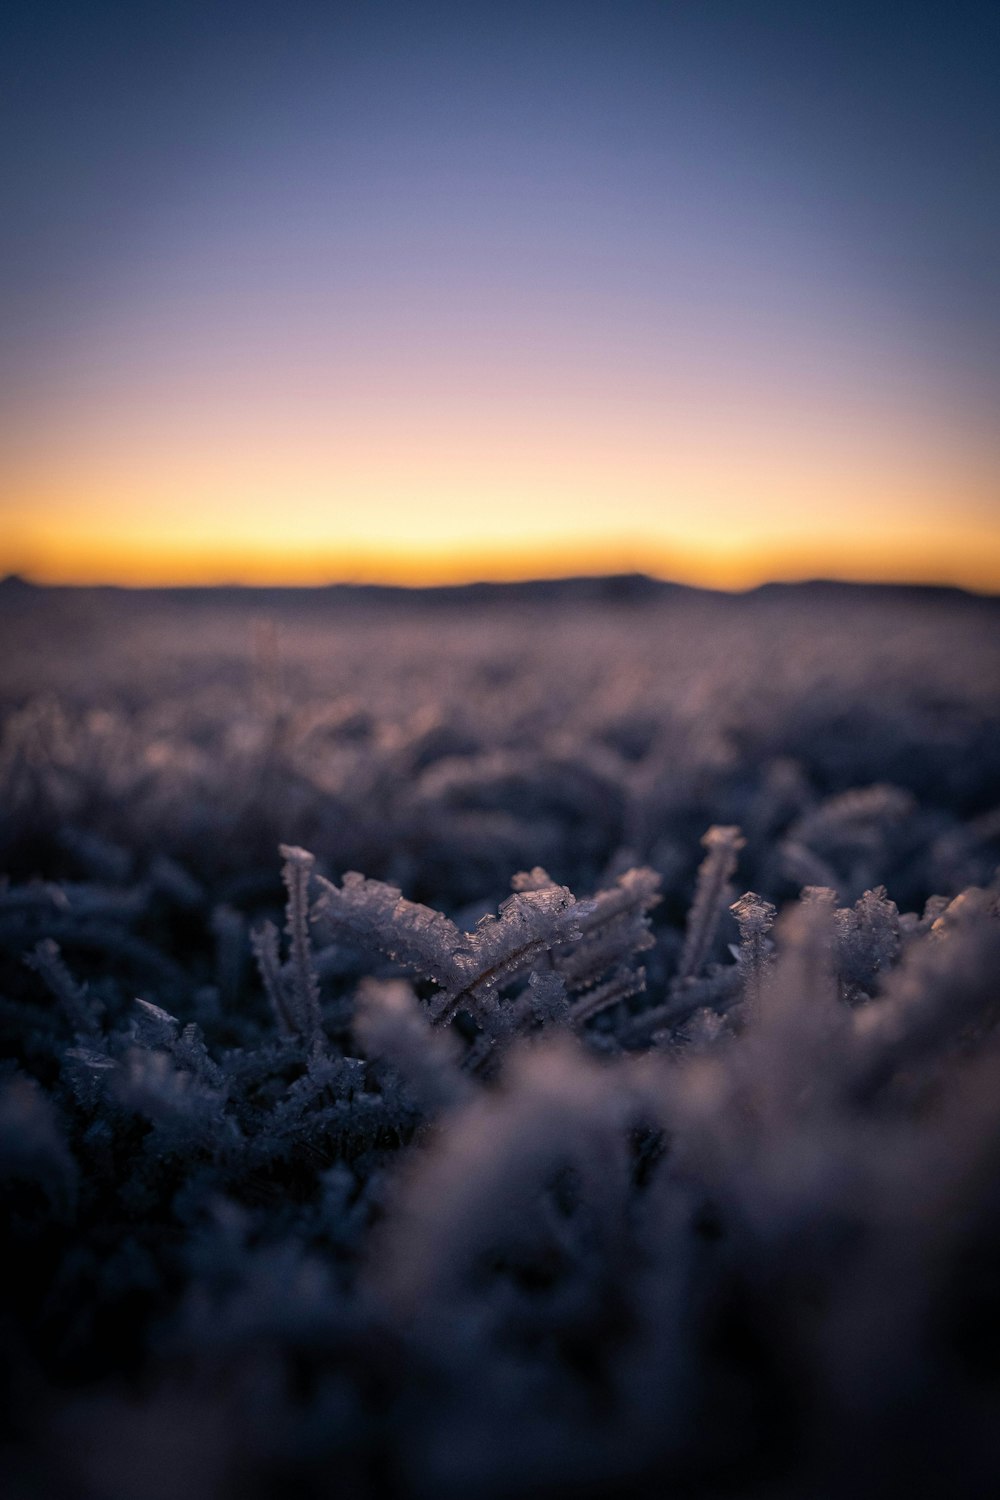 white grass field during sunset